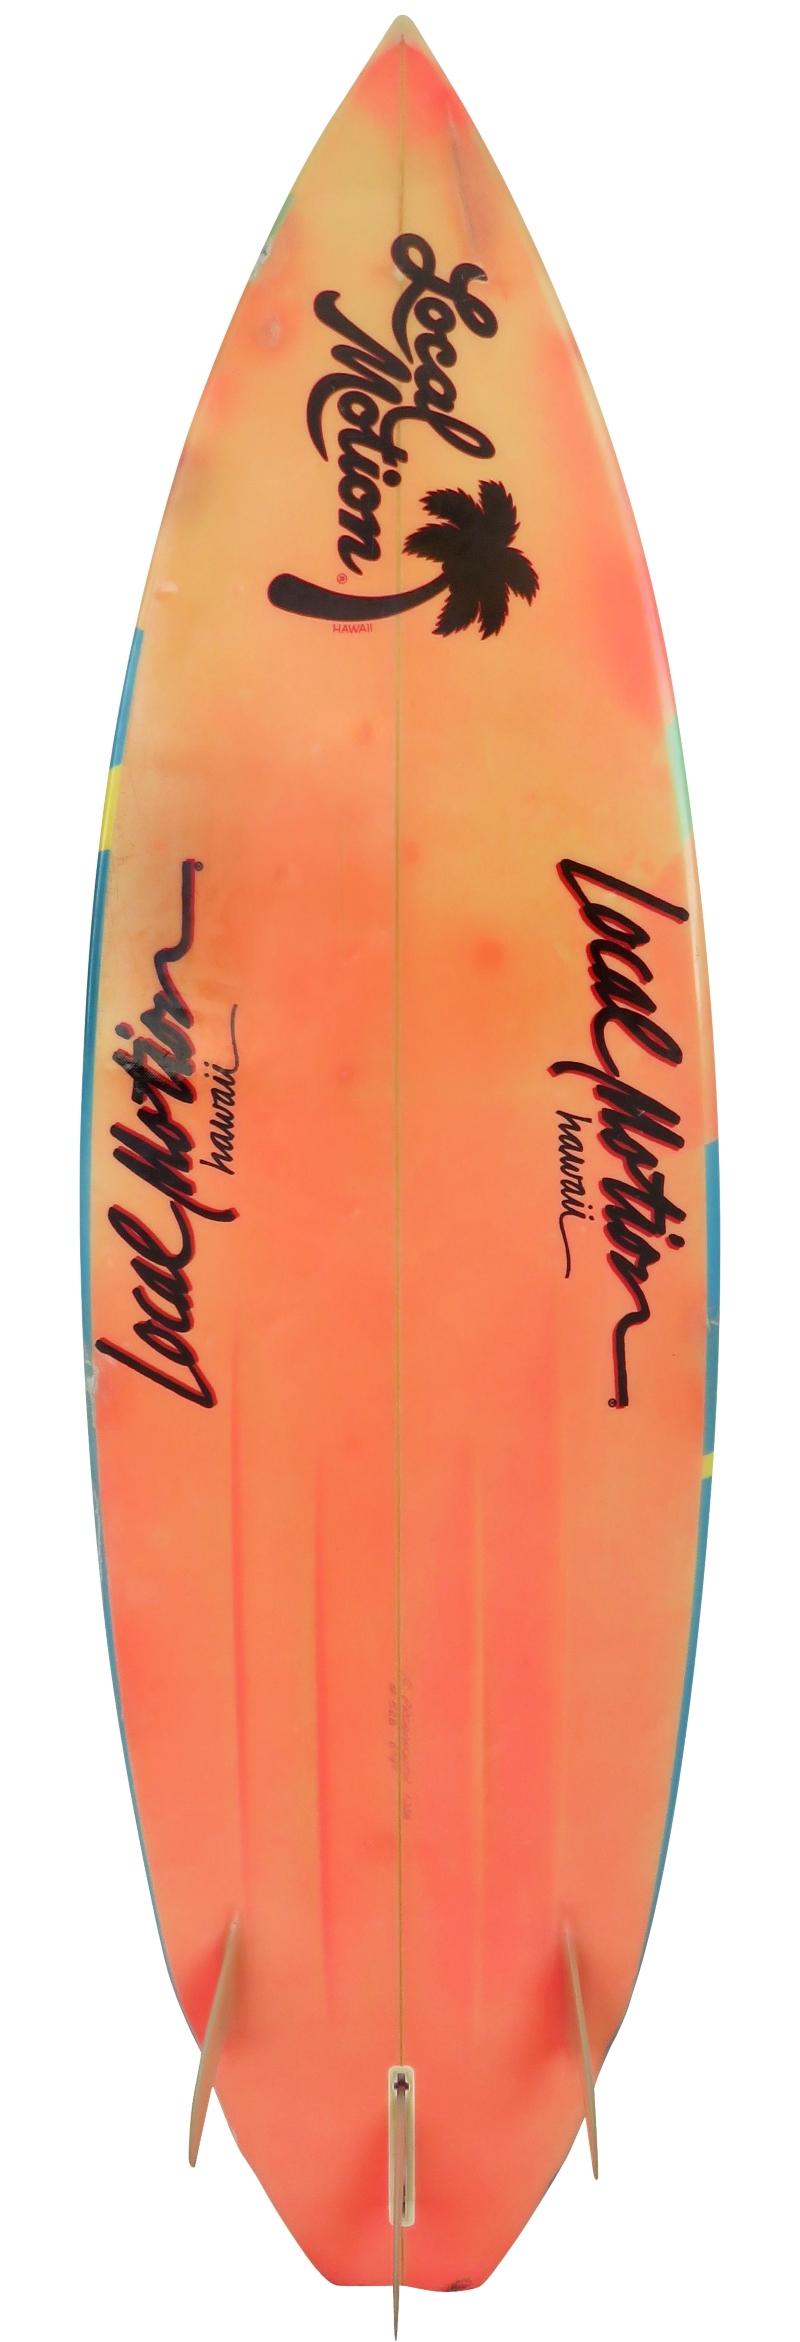 Mid-1980s local motion shortboard shaped by Robin Prodanovich. Features beautiful tropical airbrushed art on the deck with a channel bottom design and 2+1 fin setup. A fantastic example of a 1980s style airbrushed surfboard.